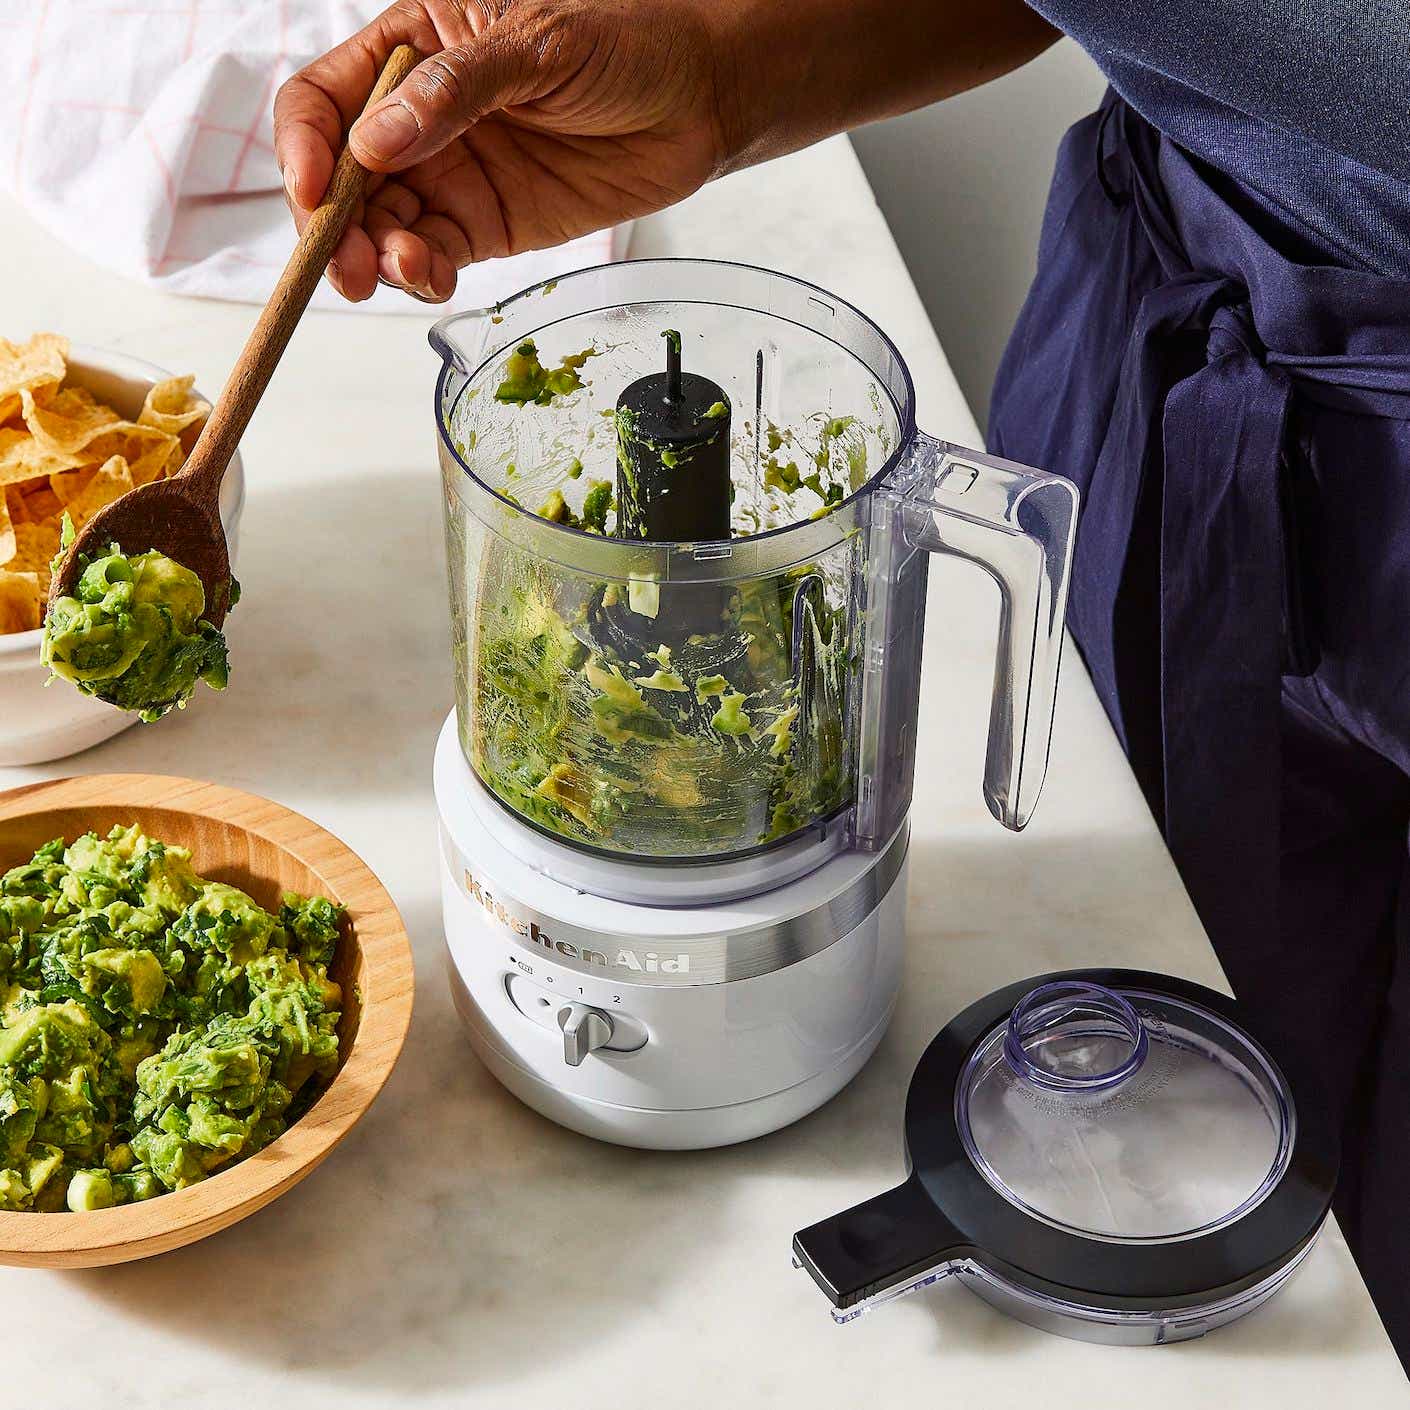 A small, cordless food processor sits on a countertop while filled with guacamole that a person spoons out of the food processor.